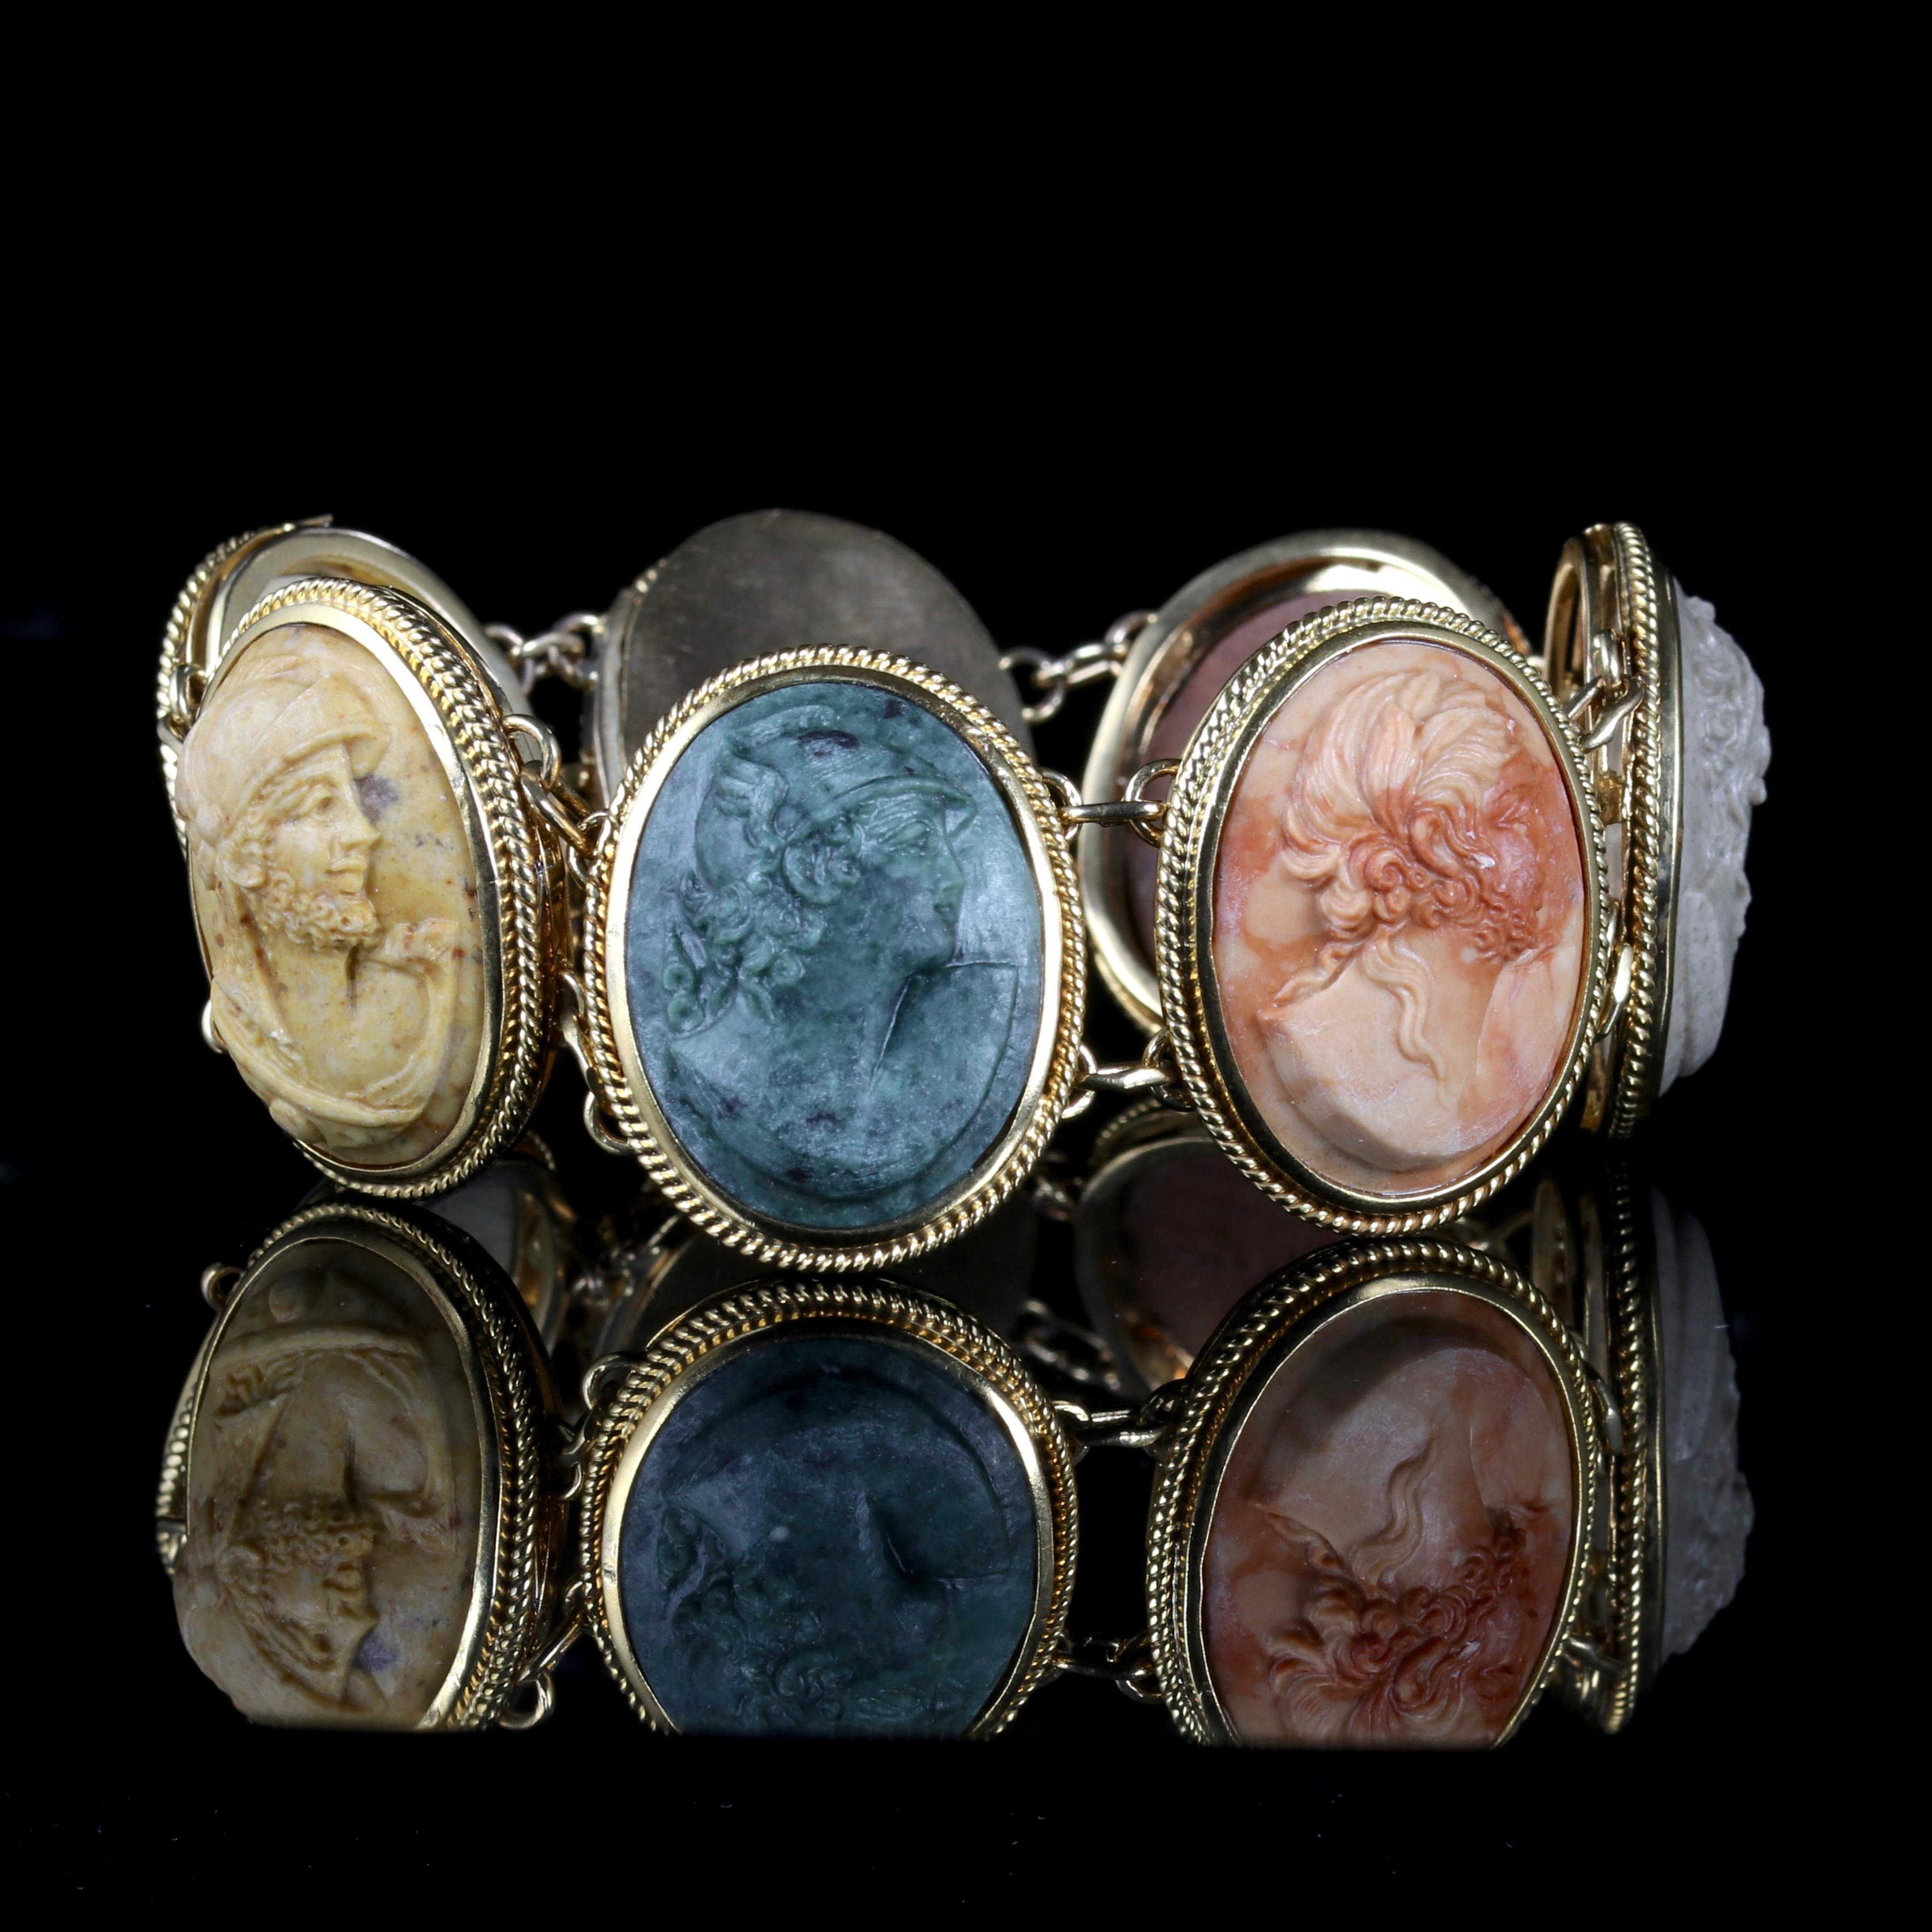 This spectacular hand-carved Cameo bracelet is set in a high carat Gold, circa 1880.

The bracelet depicts the 7 days of the week; 

Each God or Goddess represents the days of the week.

Monday: Diana (Artemis).

Tuesday:  Mars (Ares).

Wednesday: